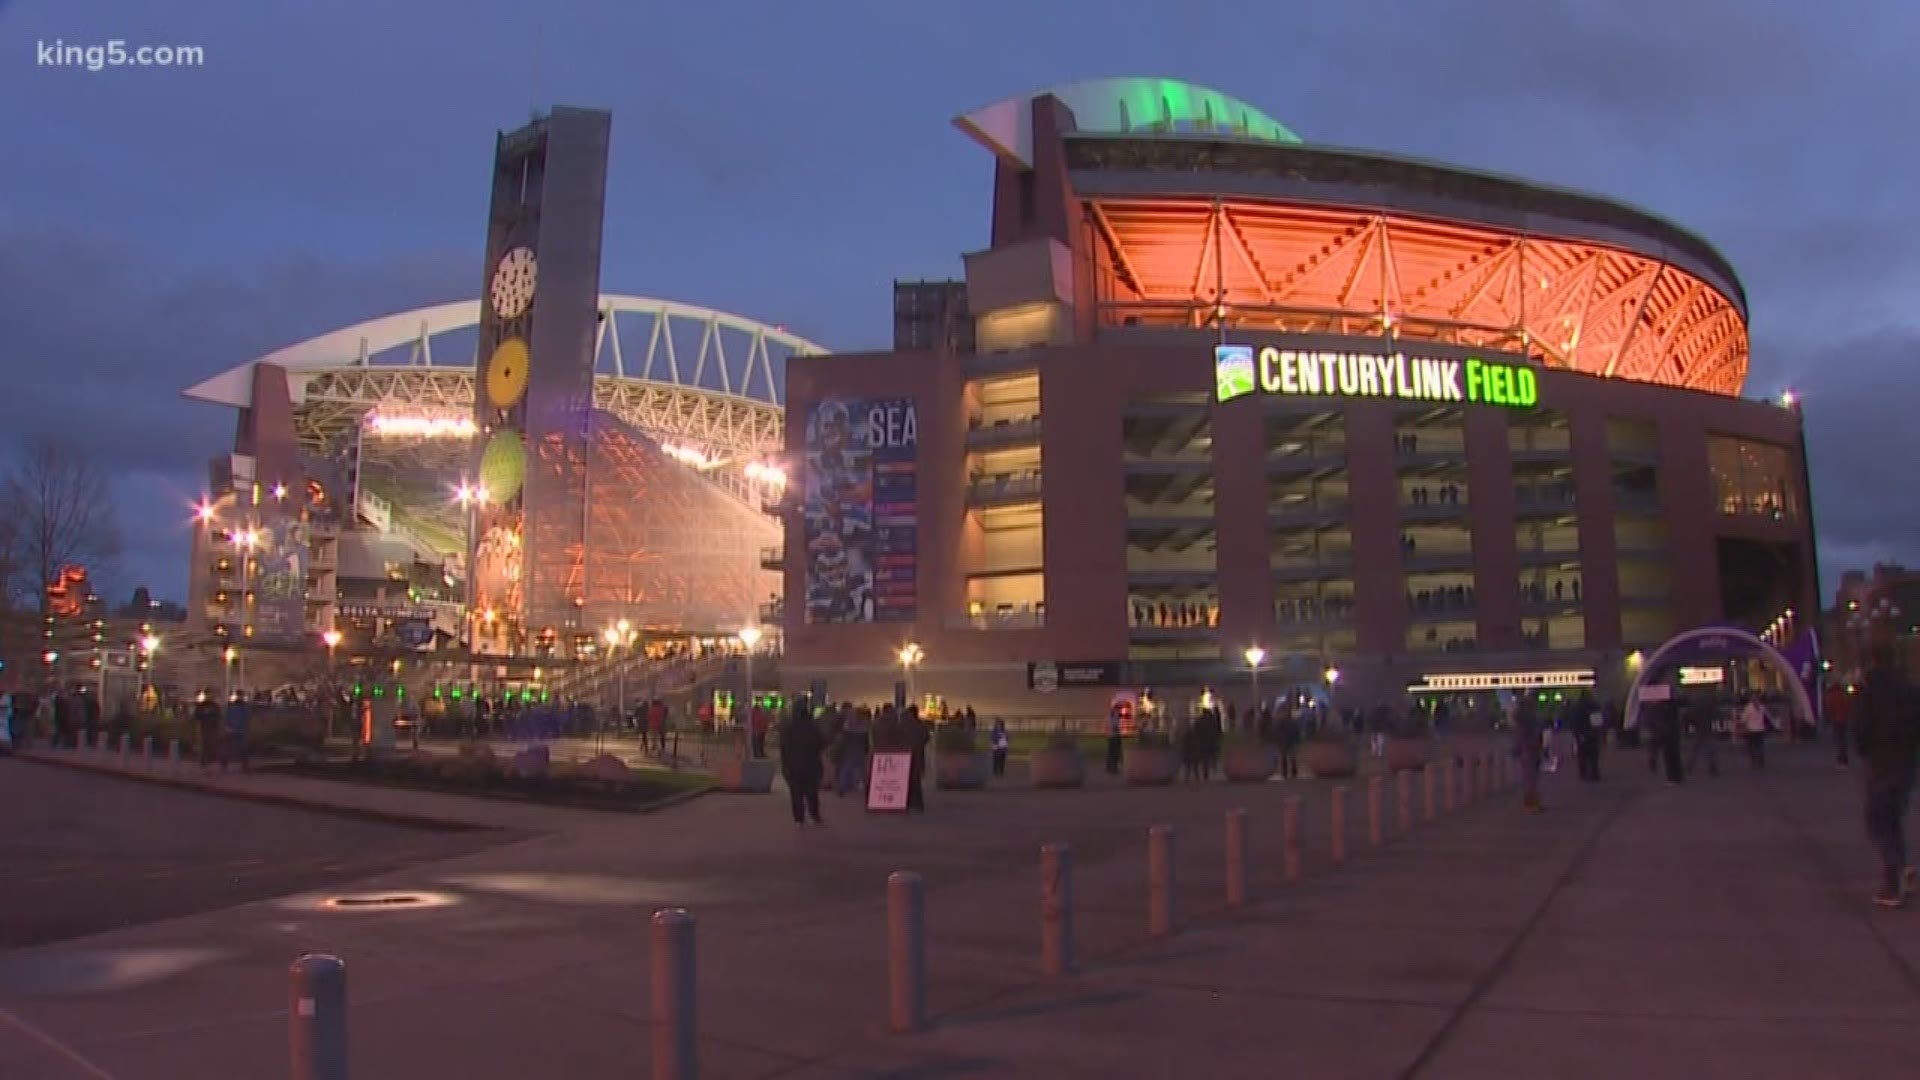 Fans show up for Sounders match Saturday night despite coronavirus concerns